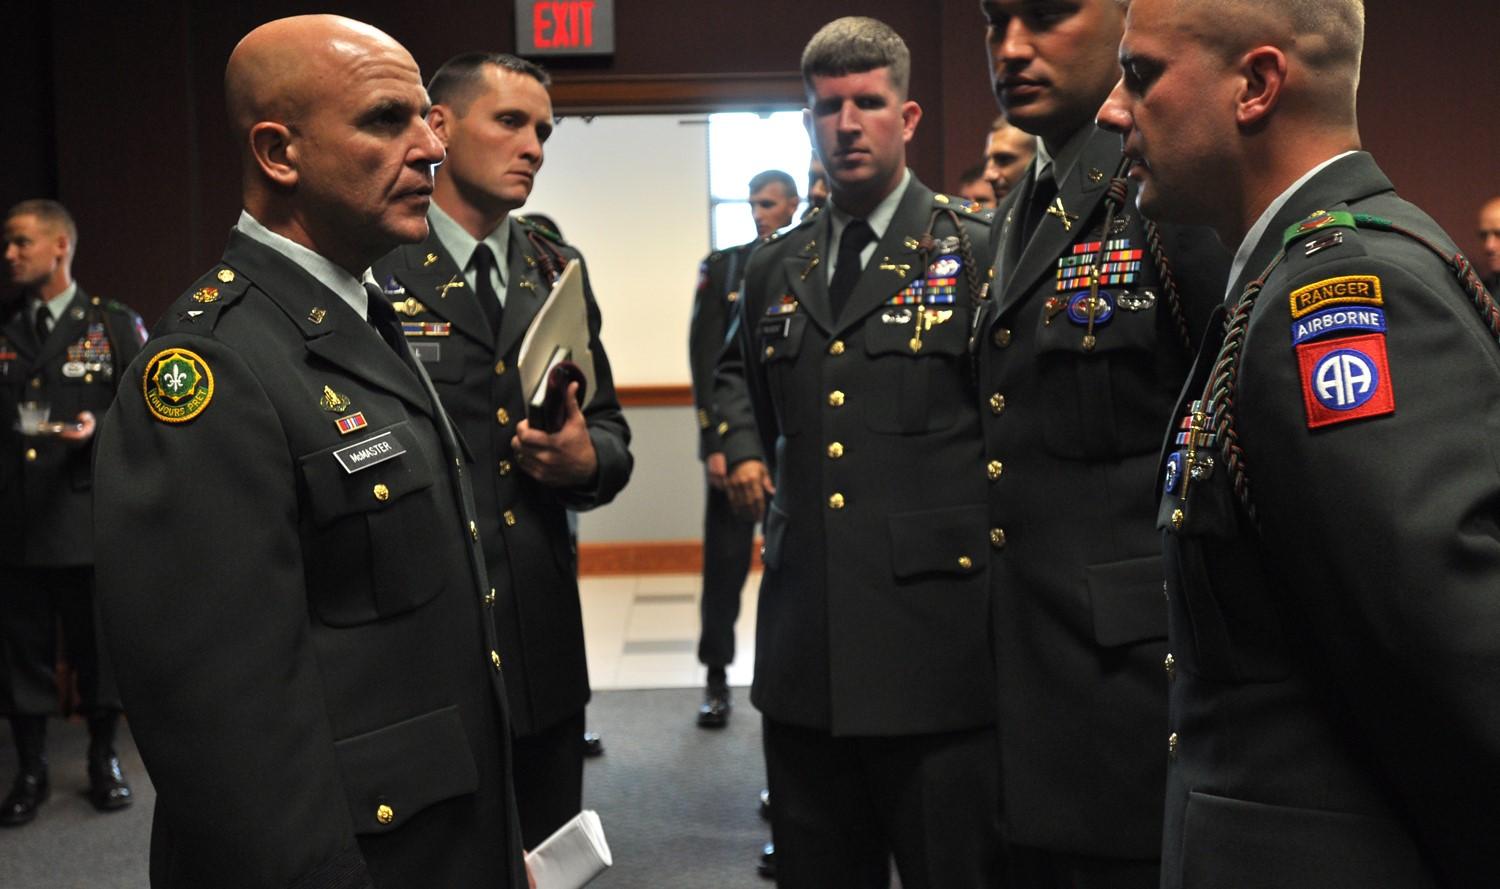 McMaster speaking with officers from the 82nd Airborne Division, 2009 (Photo: Wikimedia/United States Army)